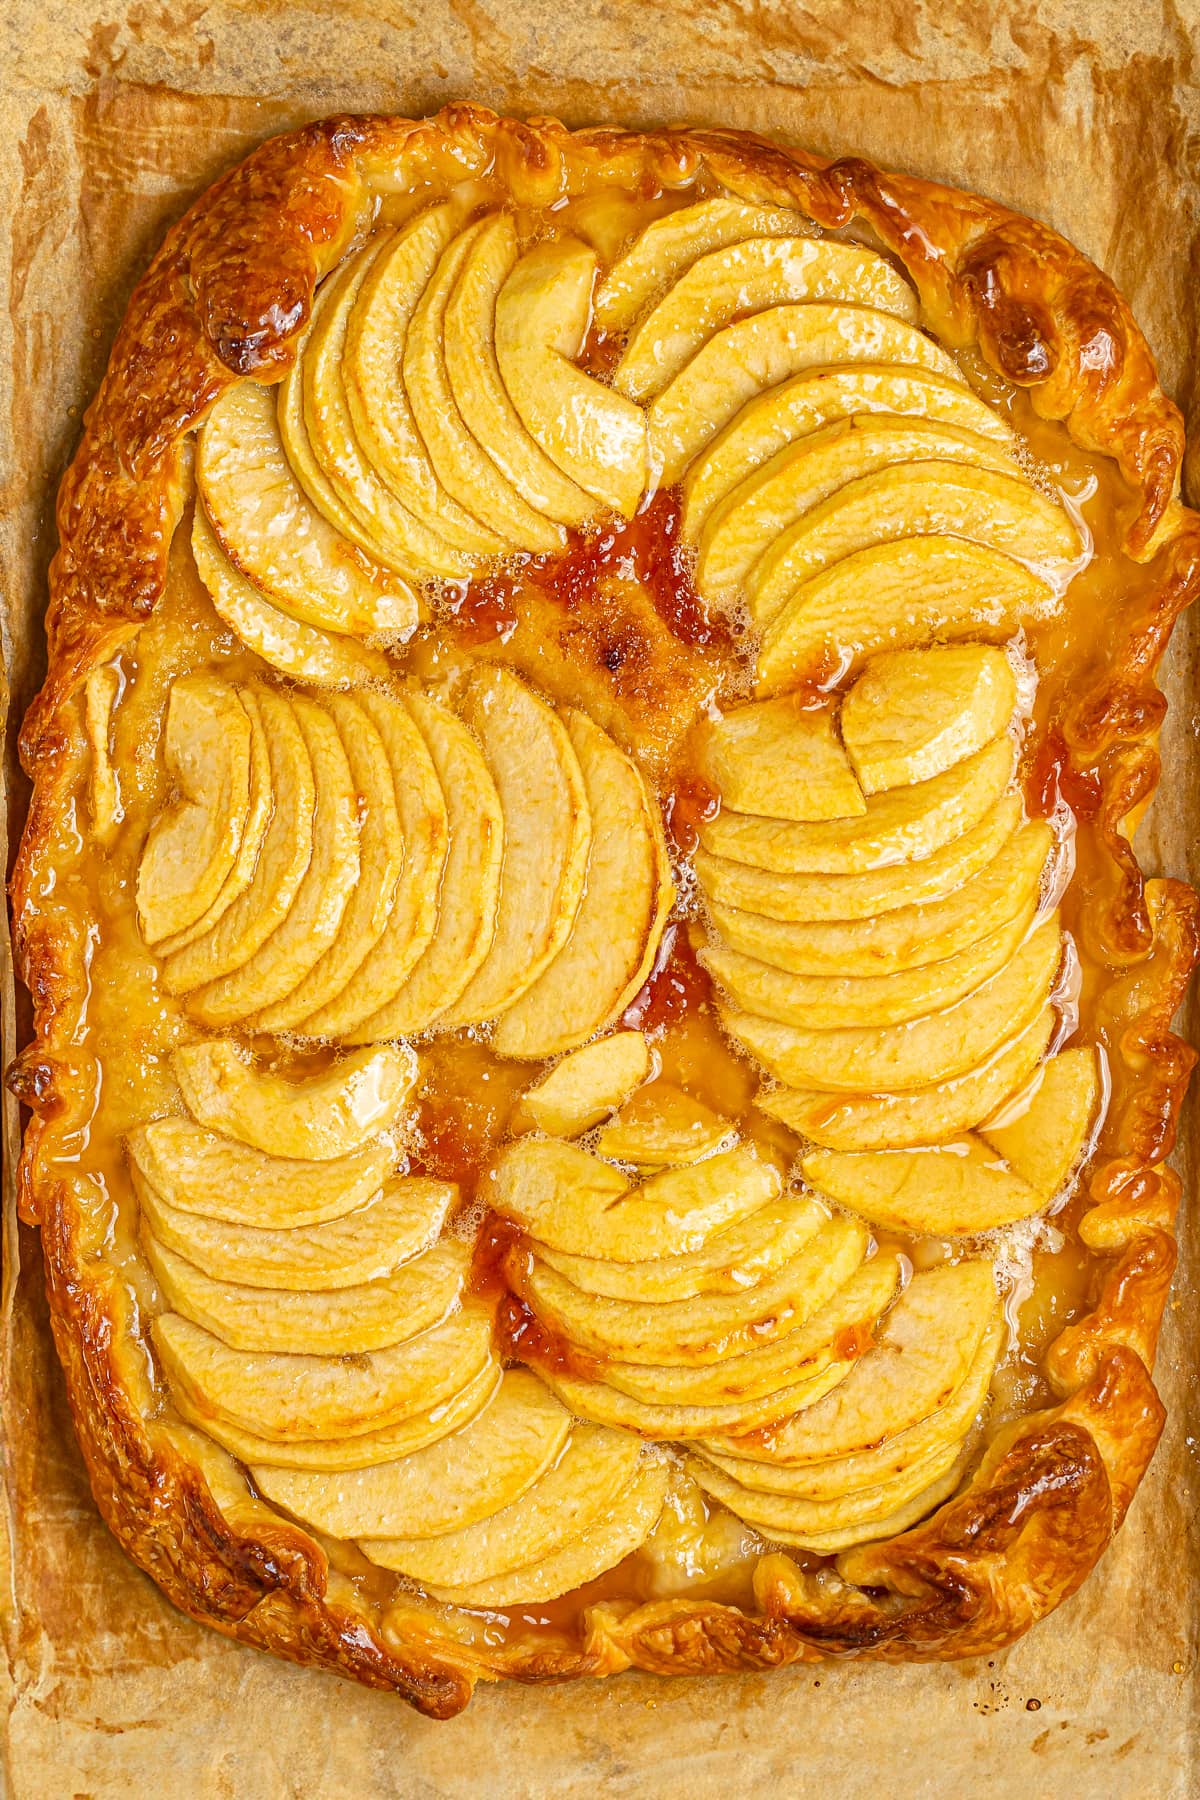 Freshly baked apple tart in a tray, golden crust with beautifully arranged baked apple slices.